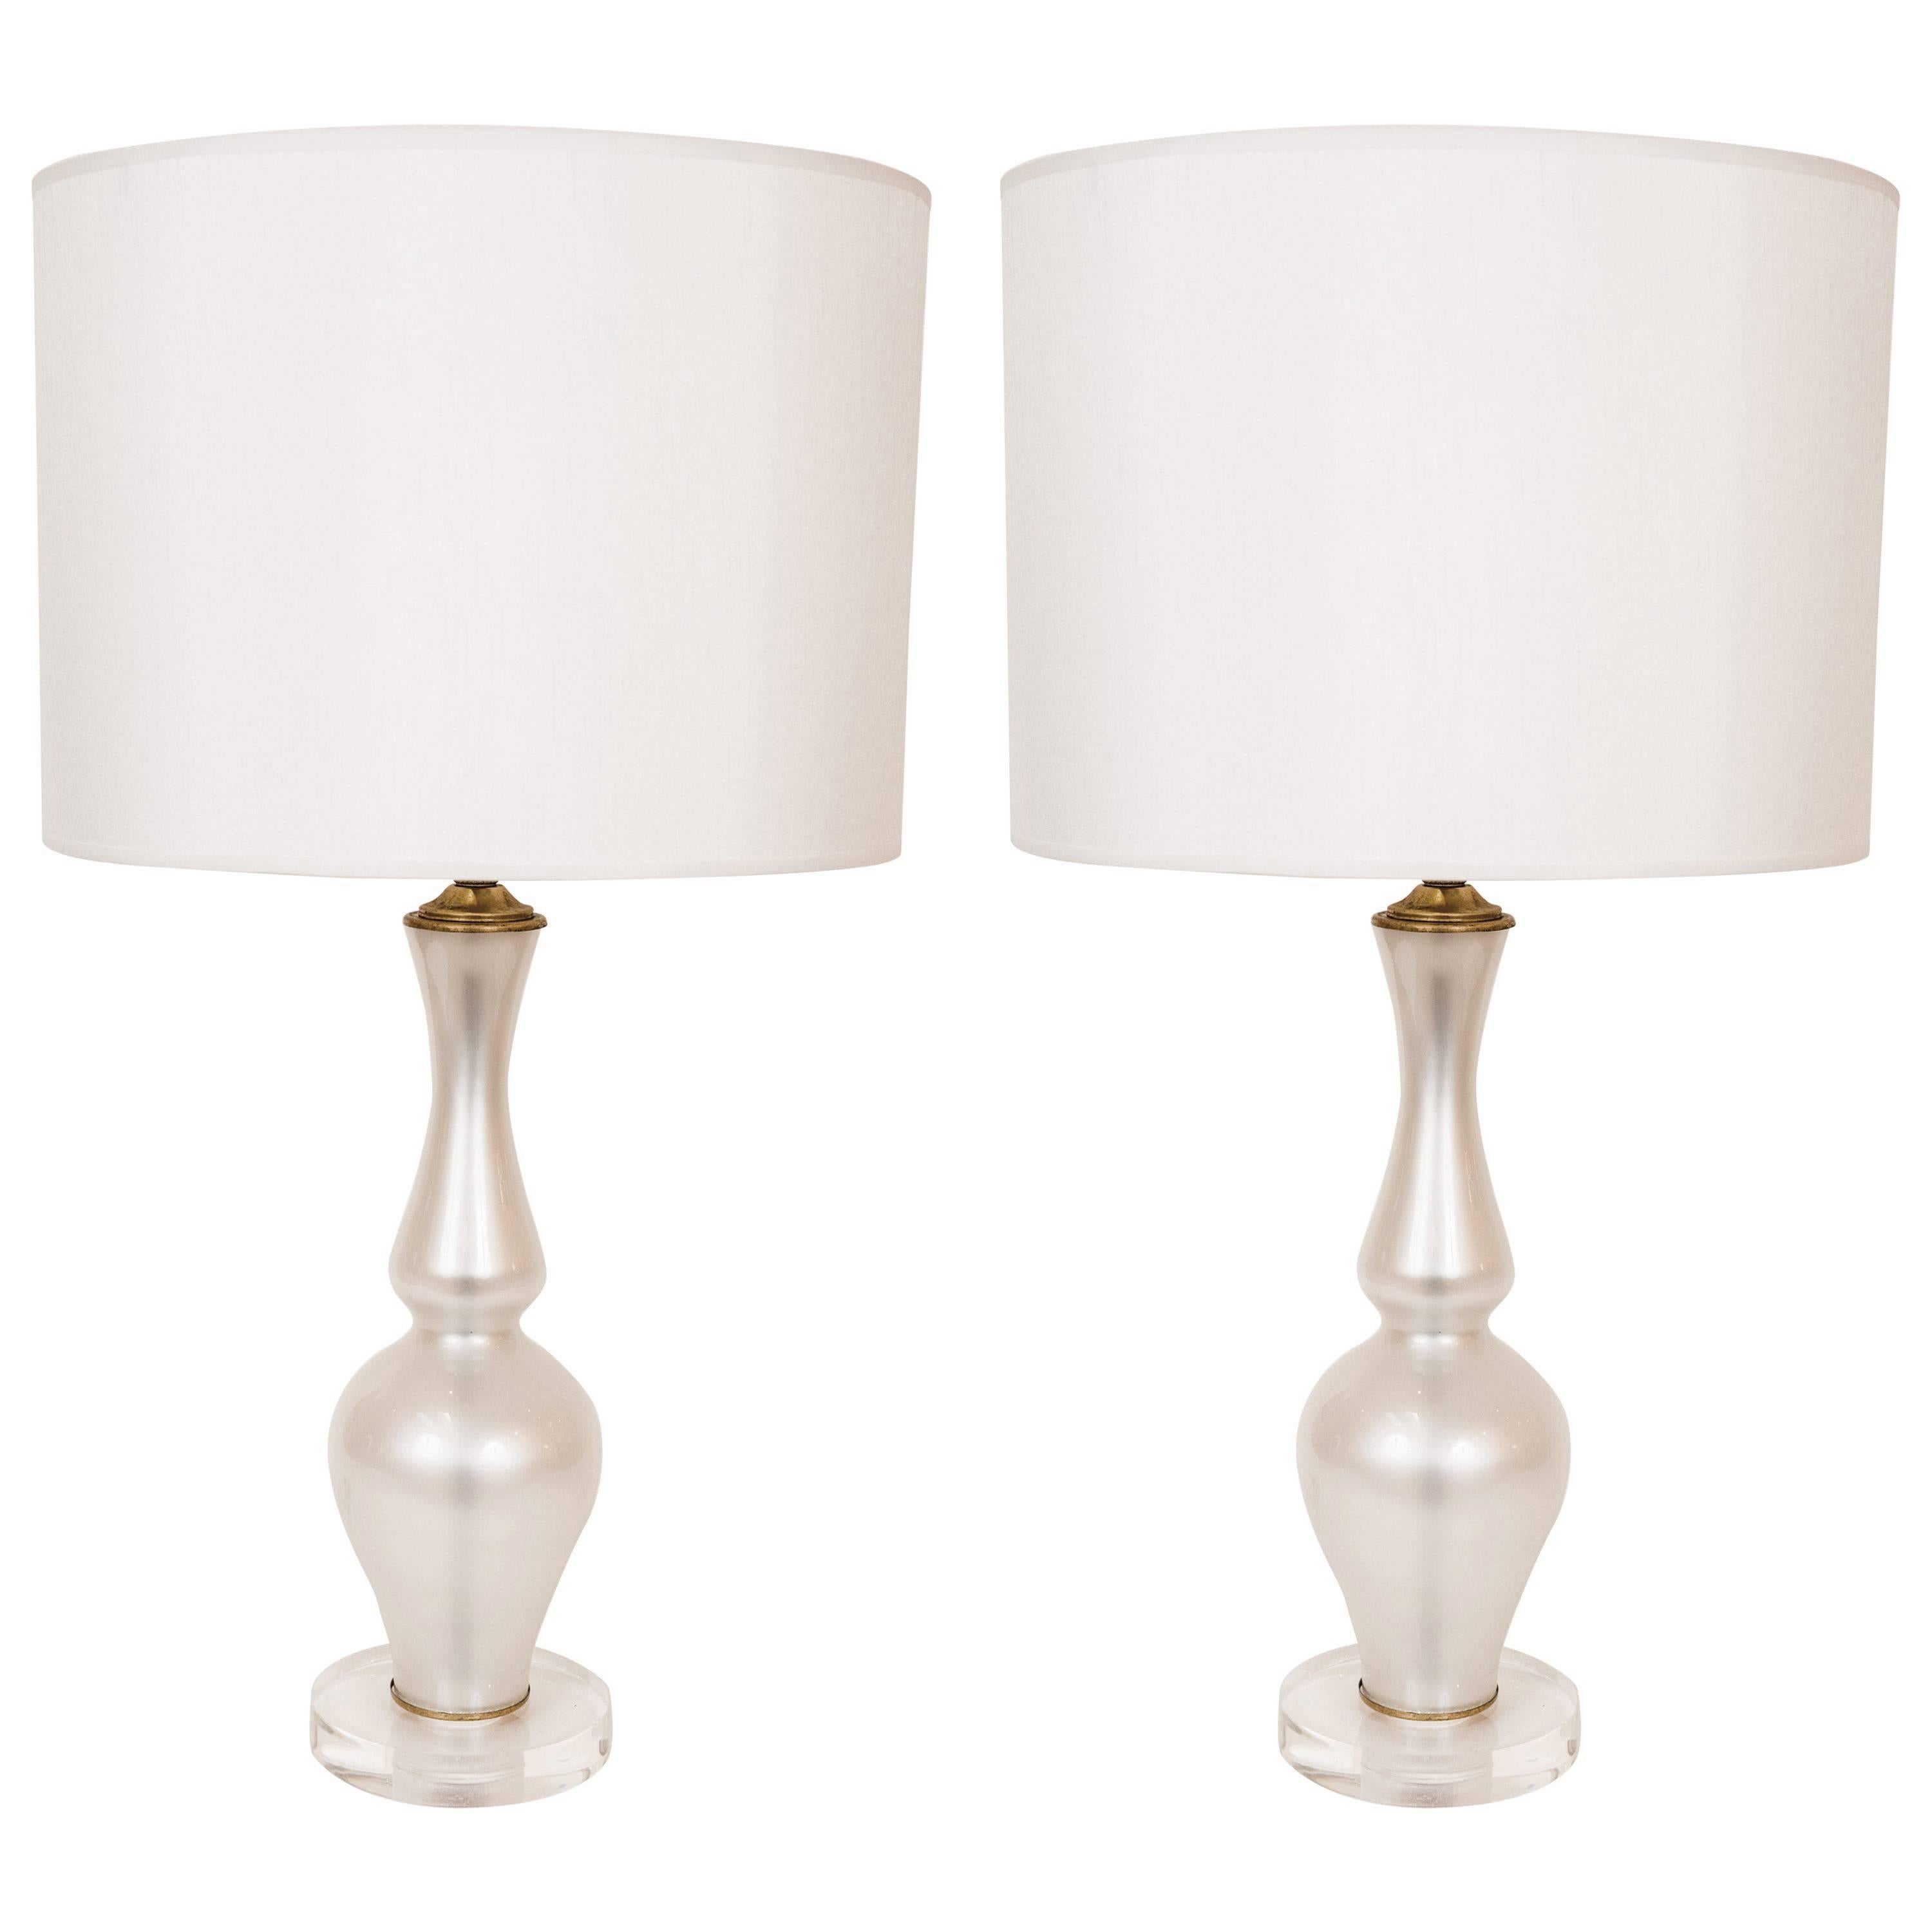 Pair of White Venetian Glass Lamps from Italy, circa 1960